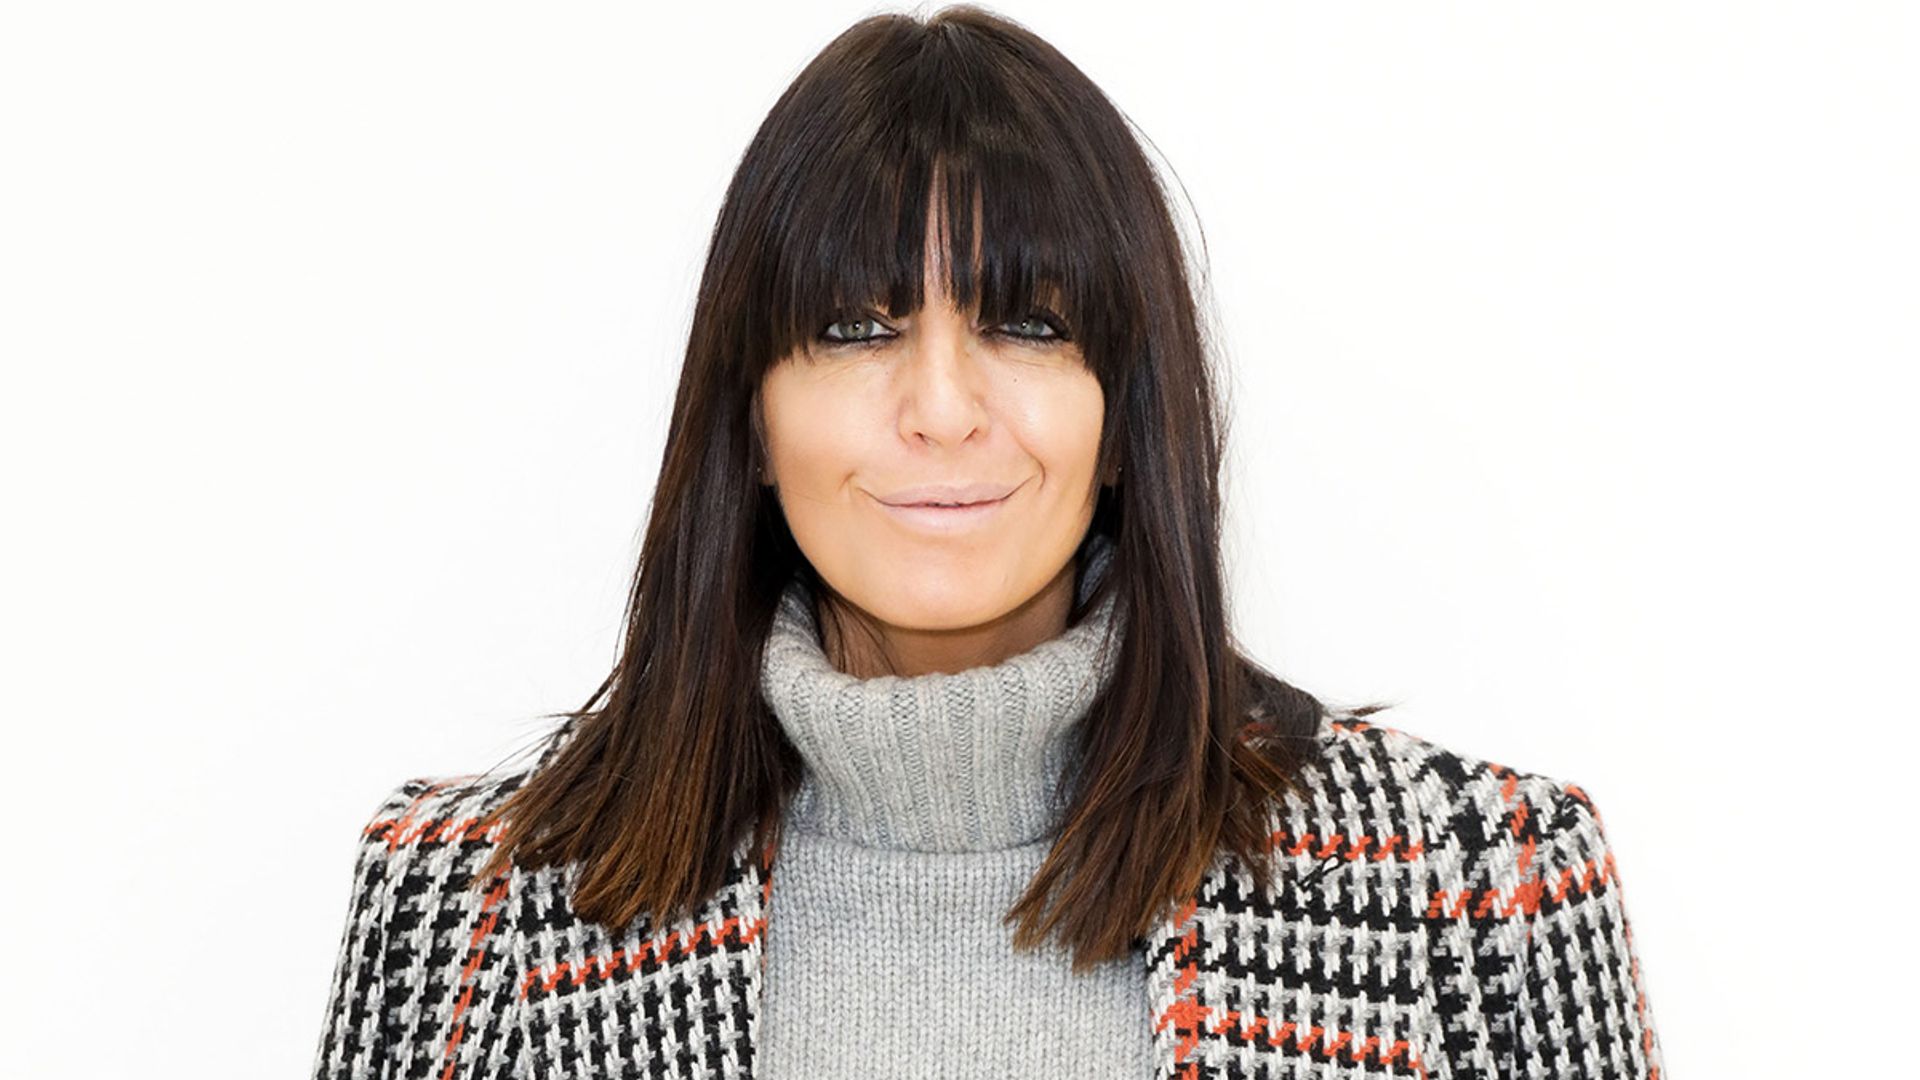 Strictly's Claudia Winkleman's sequin shirt is so popular it's sold out already